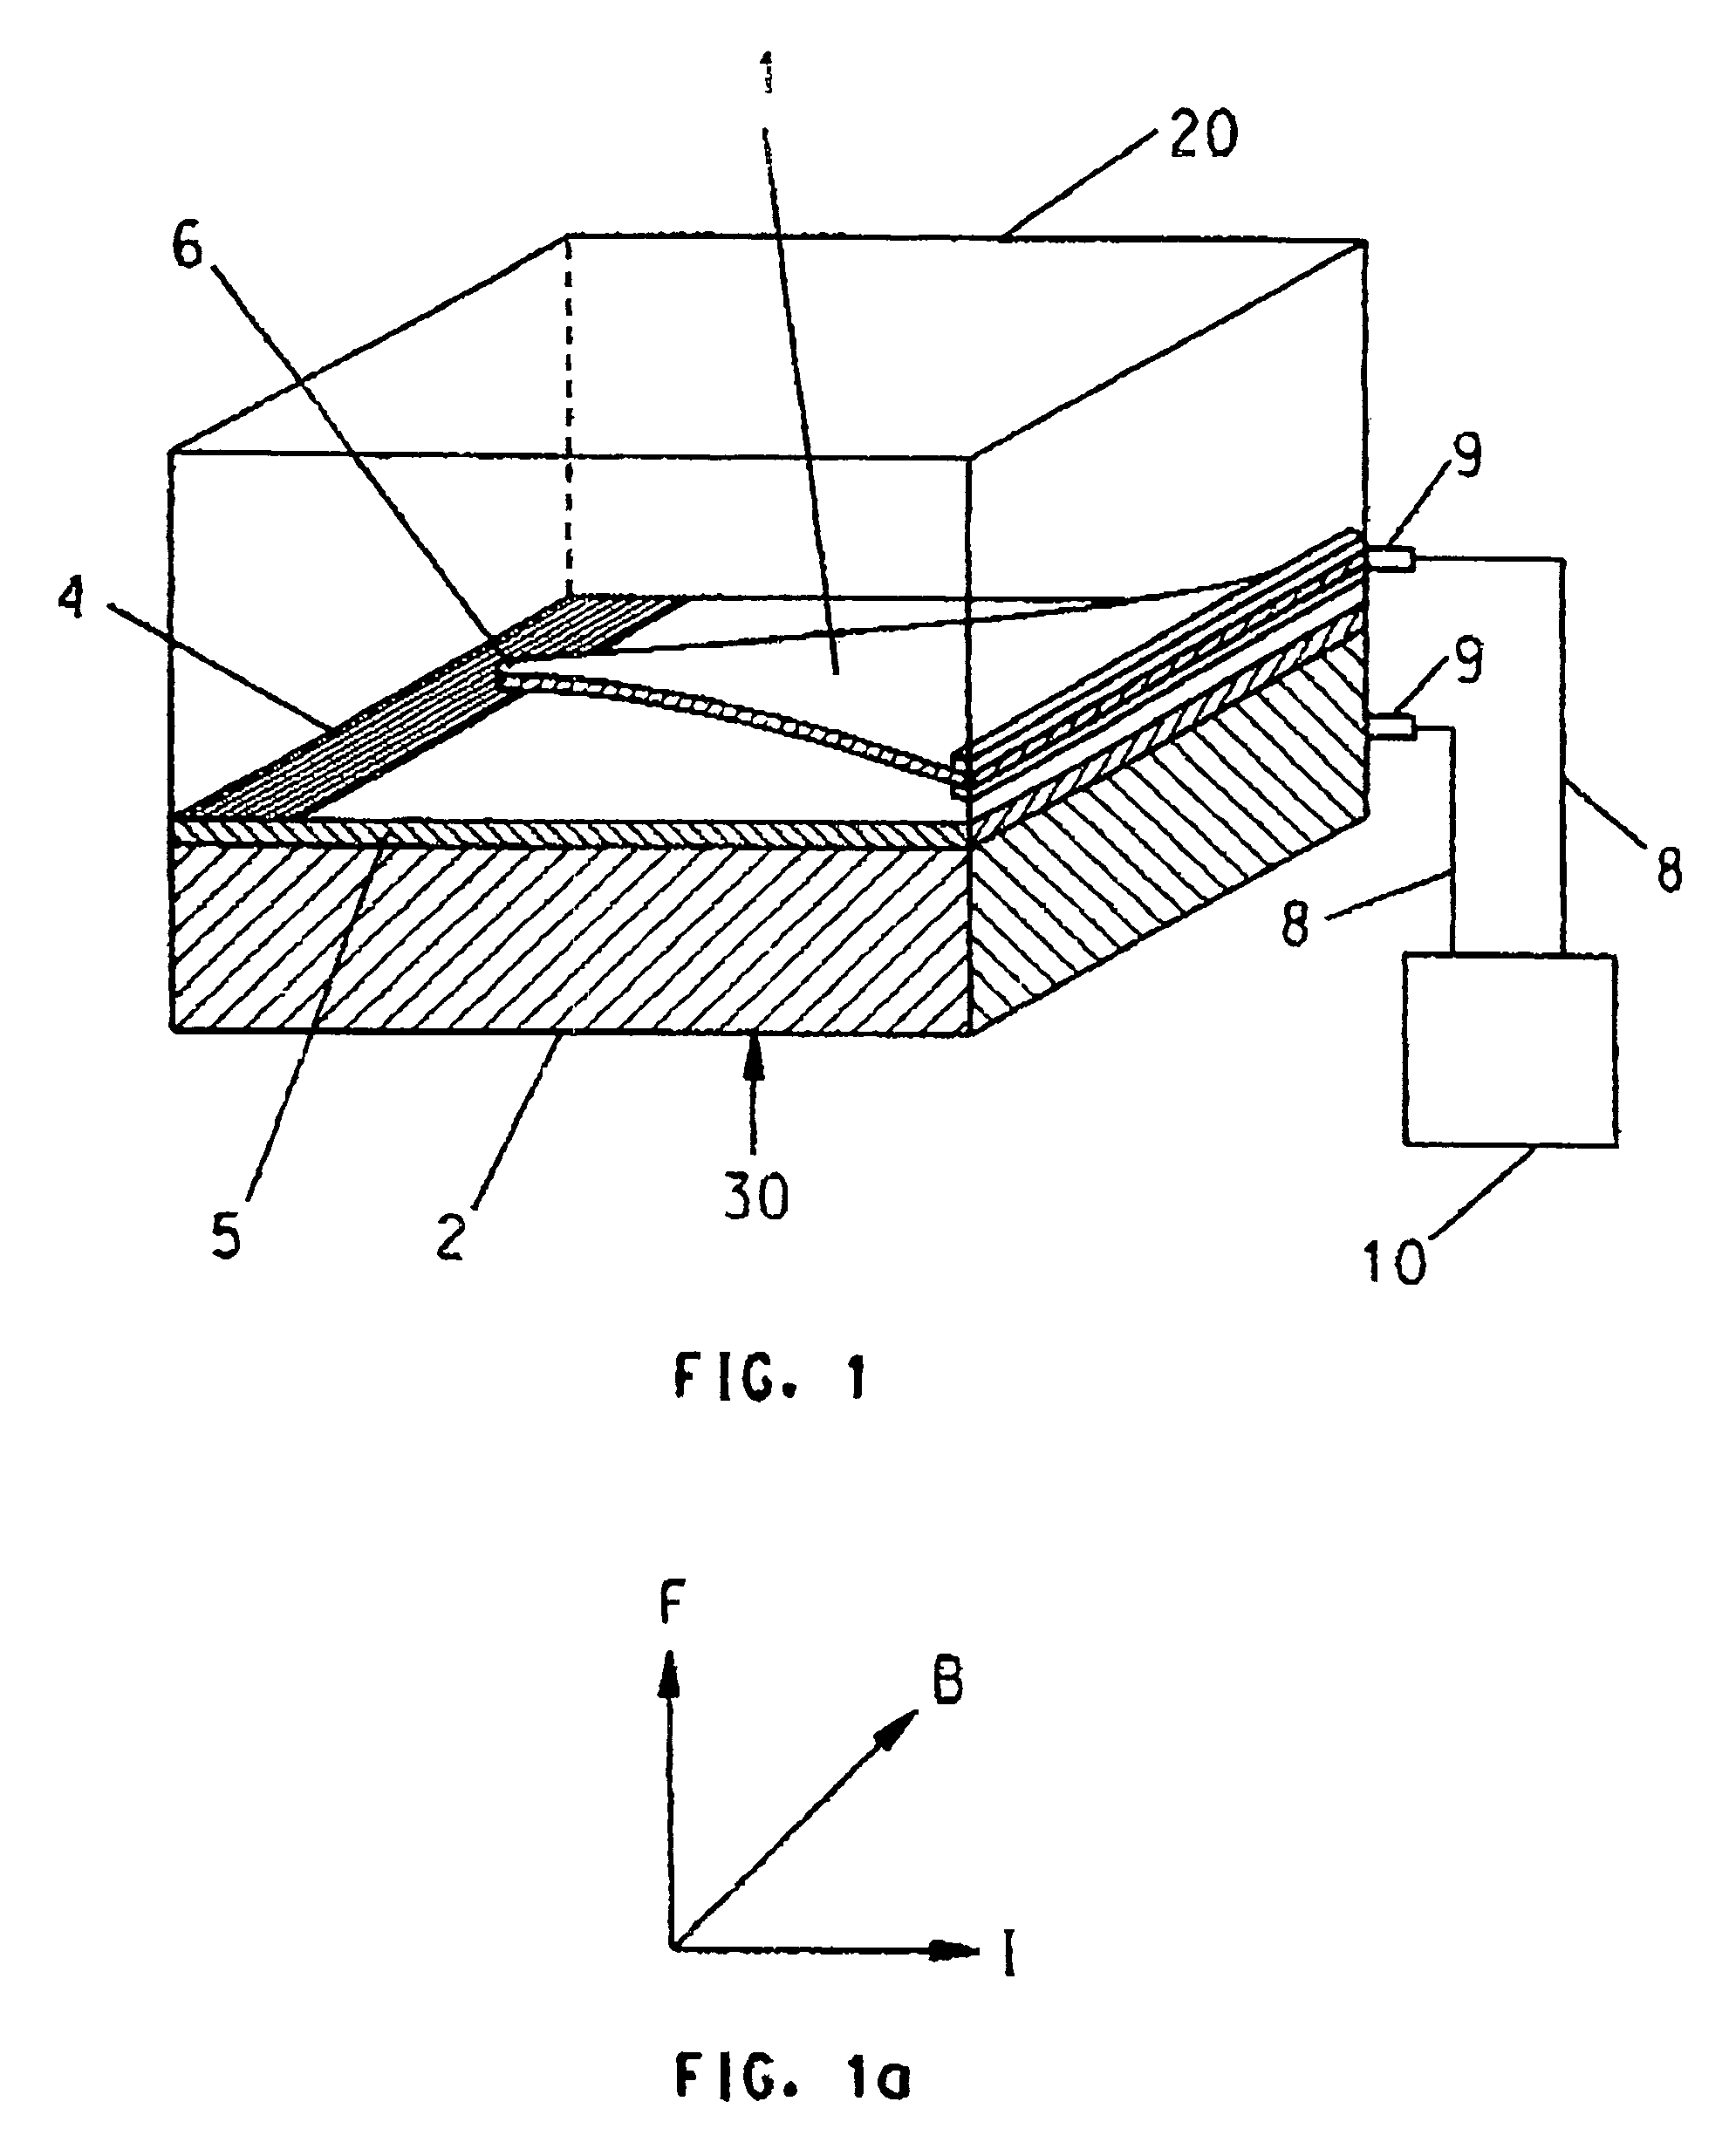 Closely spaced electrodes with a uniform gap